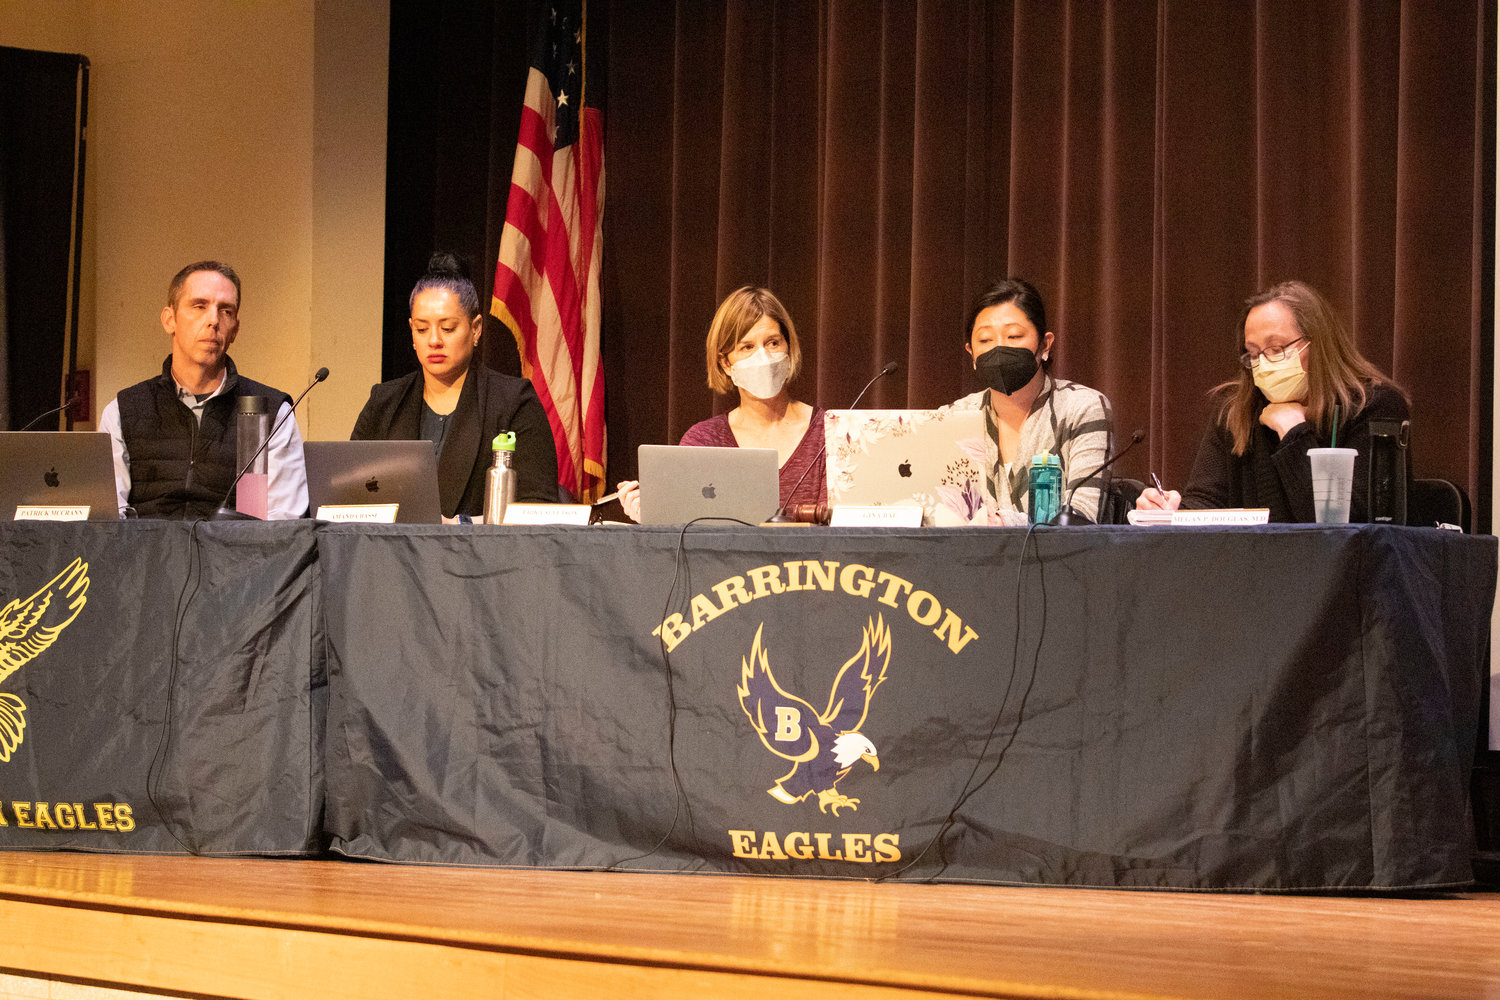 Members of the Barrington School Committee are shown during a meeting last spring. They are (from left to right) Patrick McCrann, Amanda Basse, Erika Sevetson, Gina Bae and Megan Douglas.